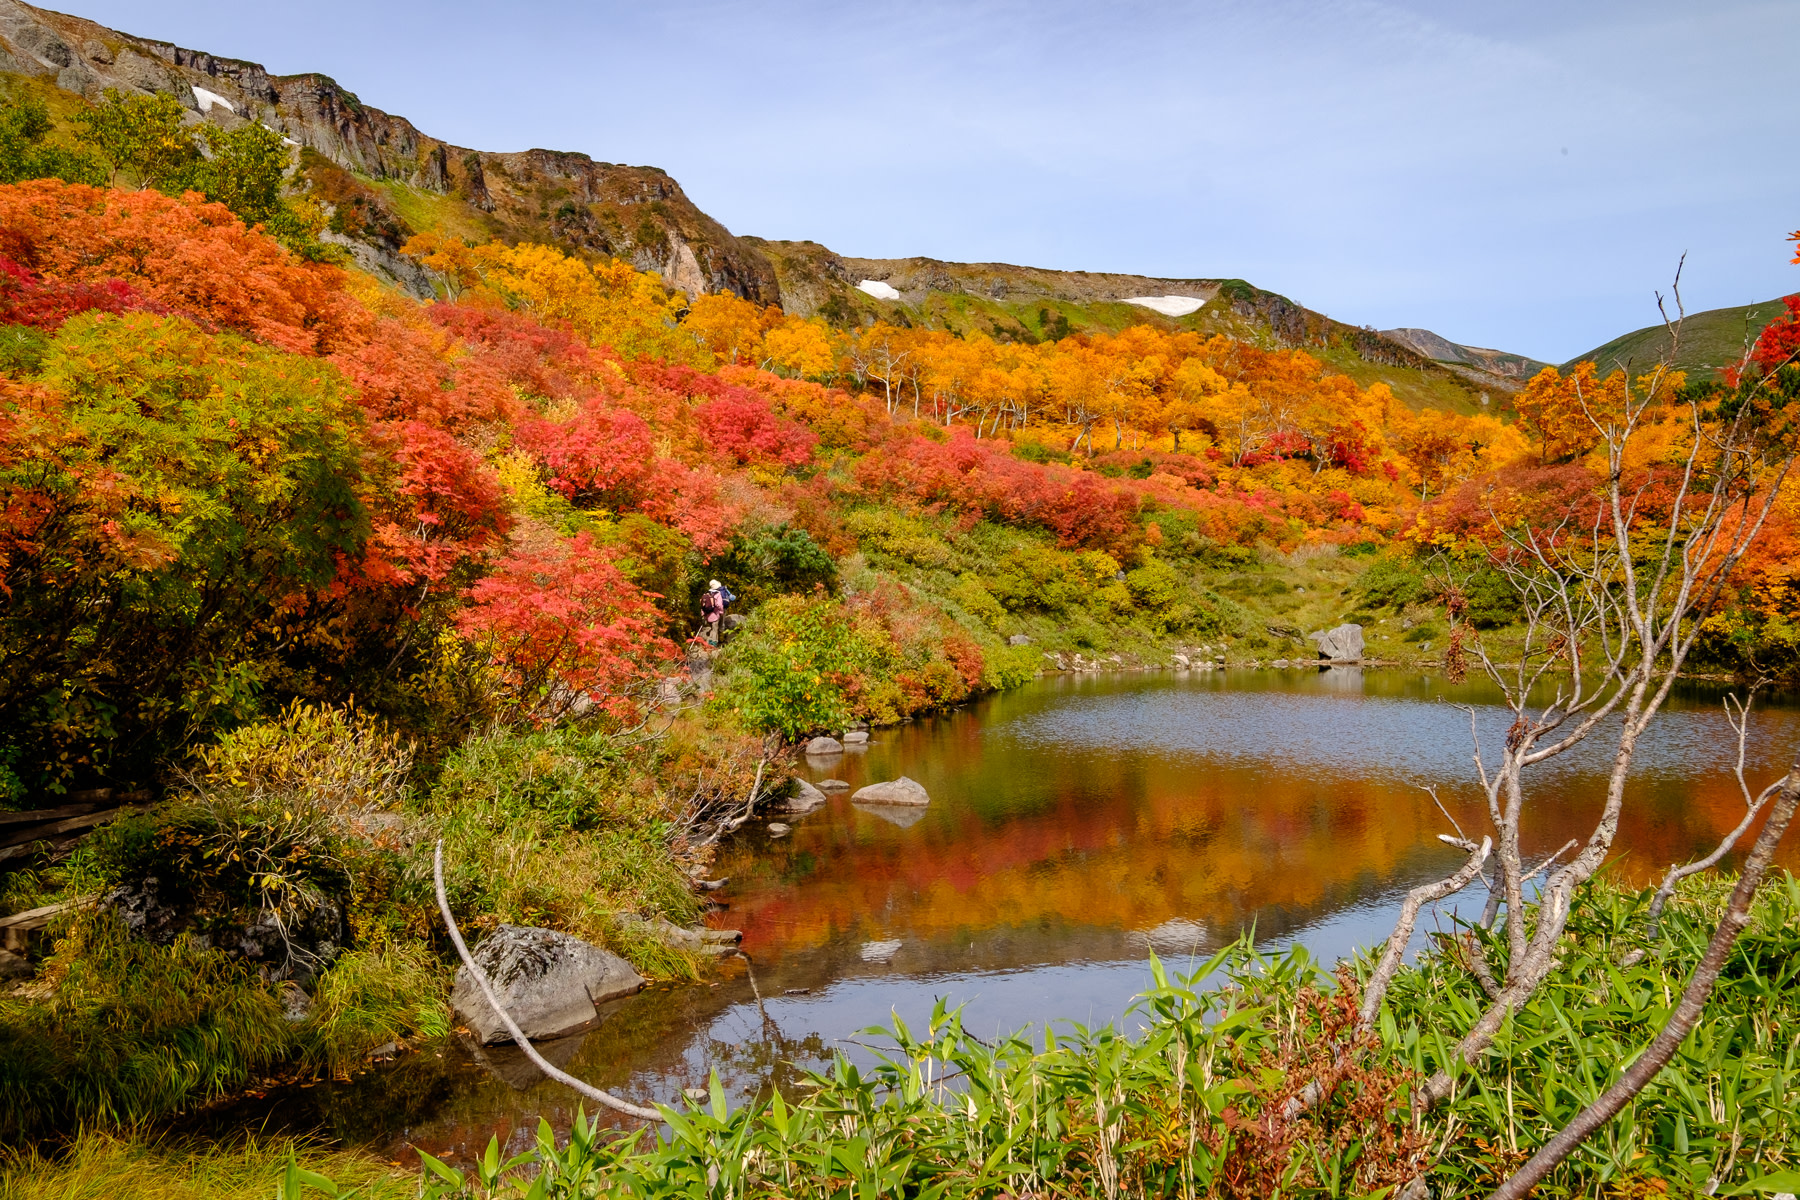 A dazzling display of autumn colors at Kogen Numa in Daisetsuzan National Park.